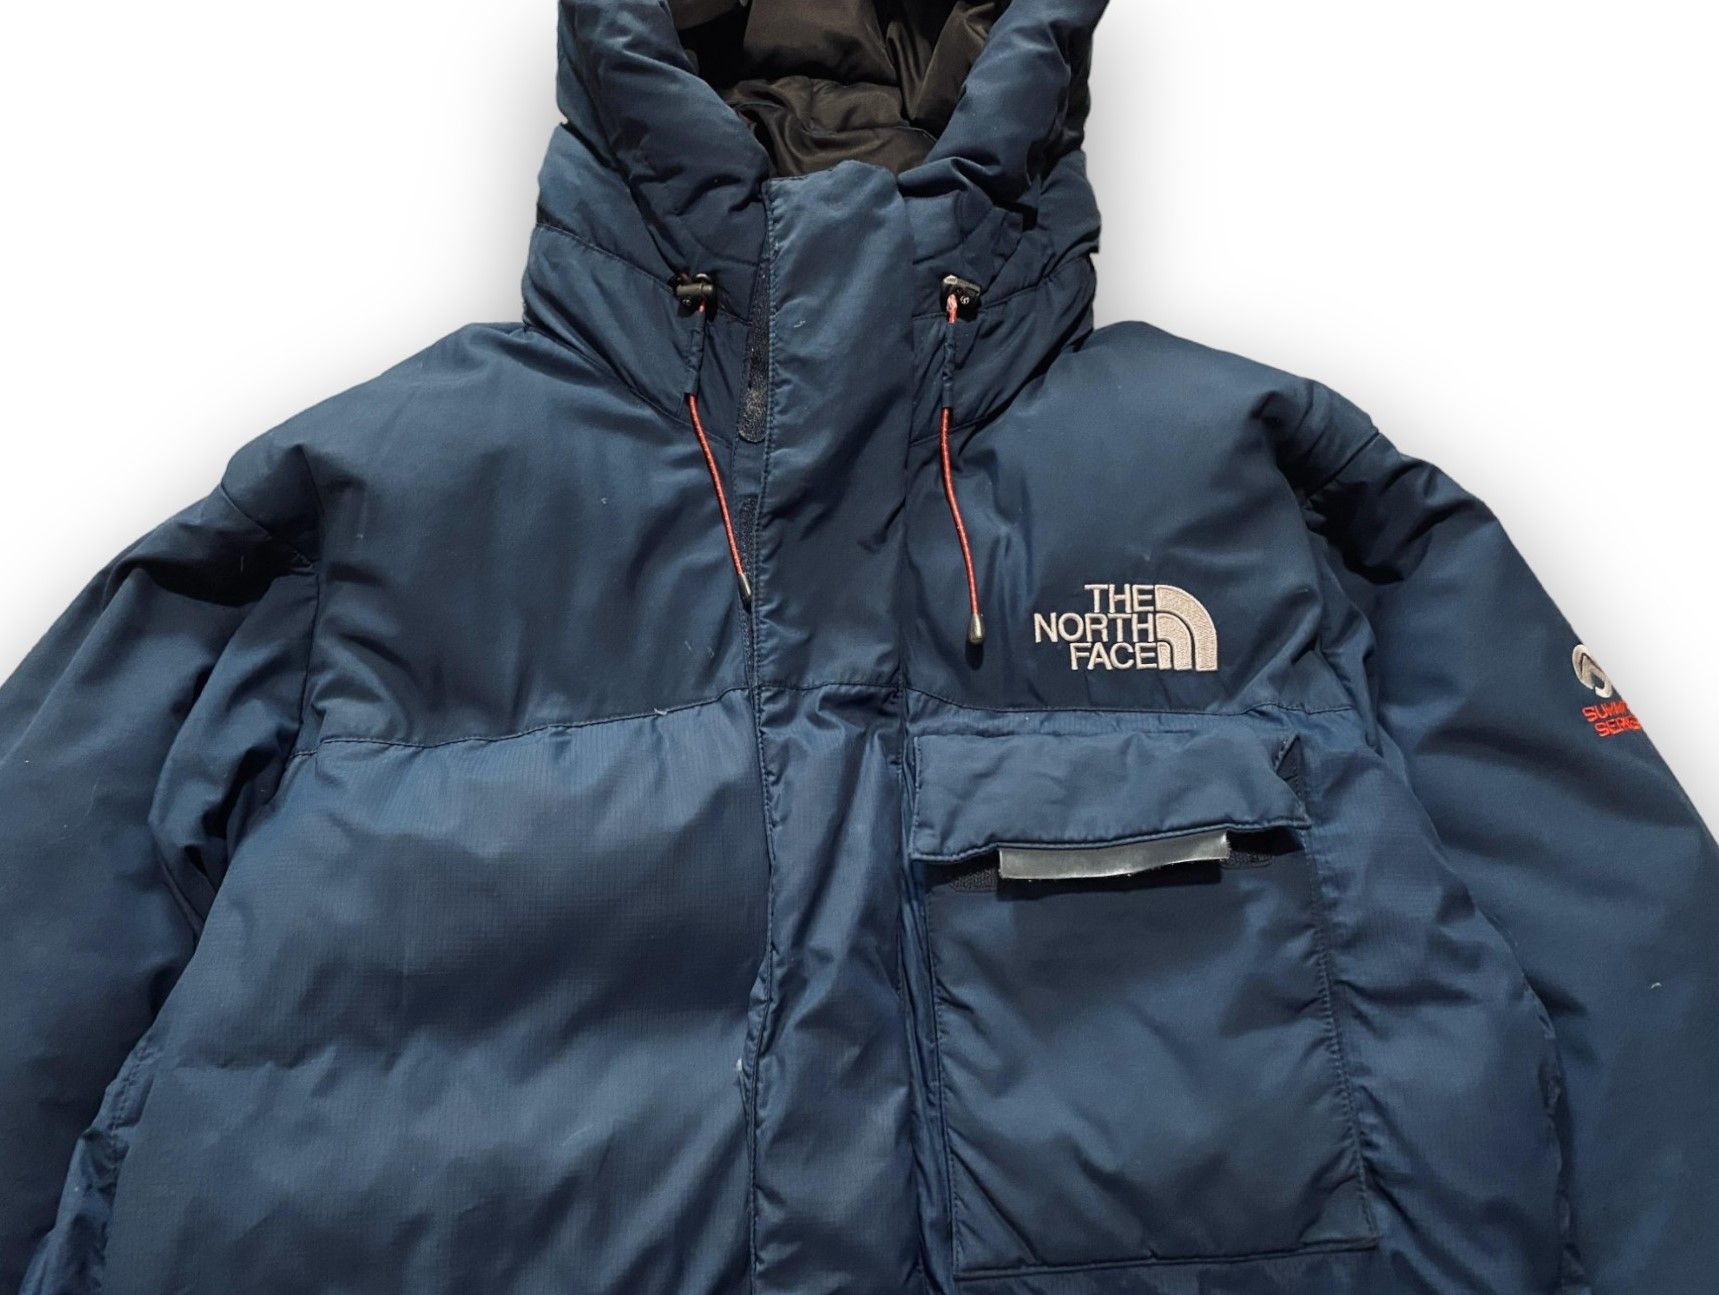 The North Face Puffer Jacket Summit Series 700 Navy - 2